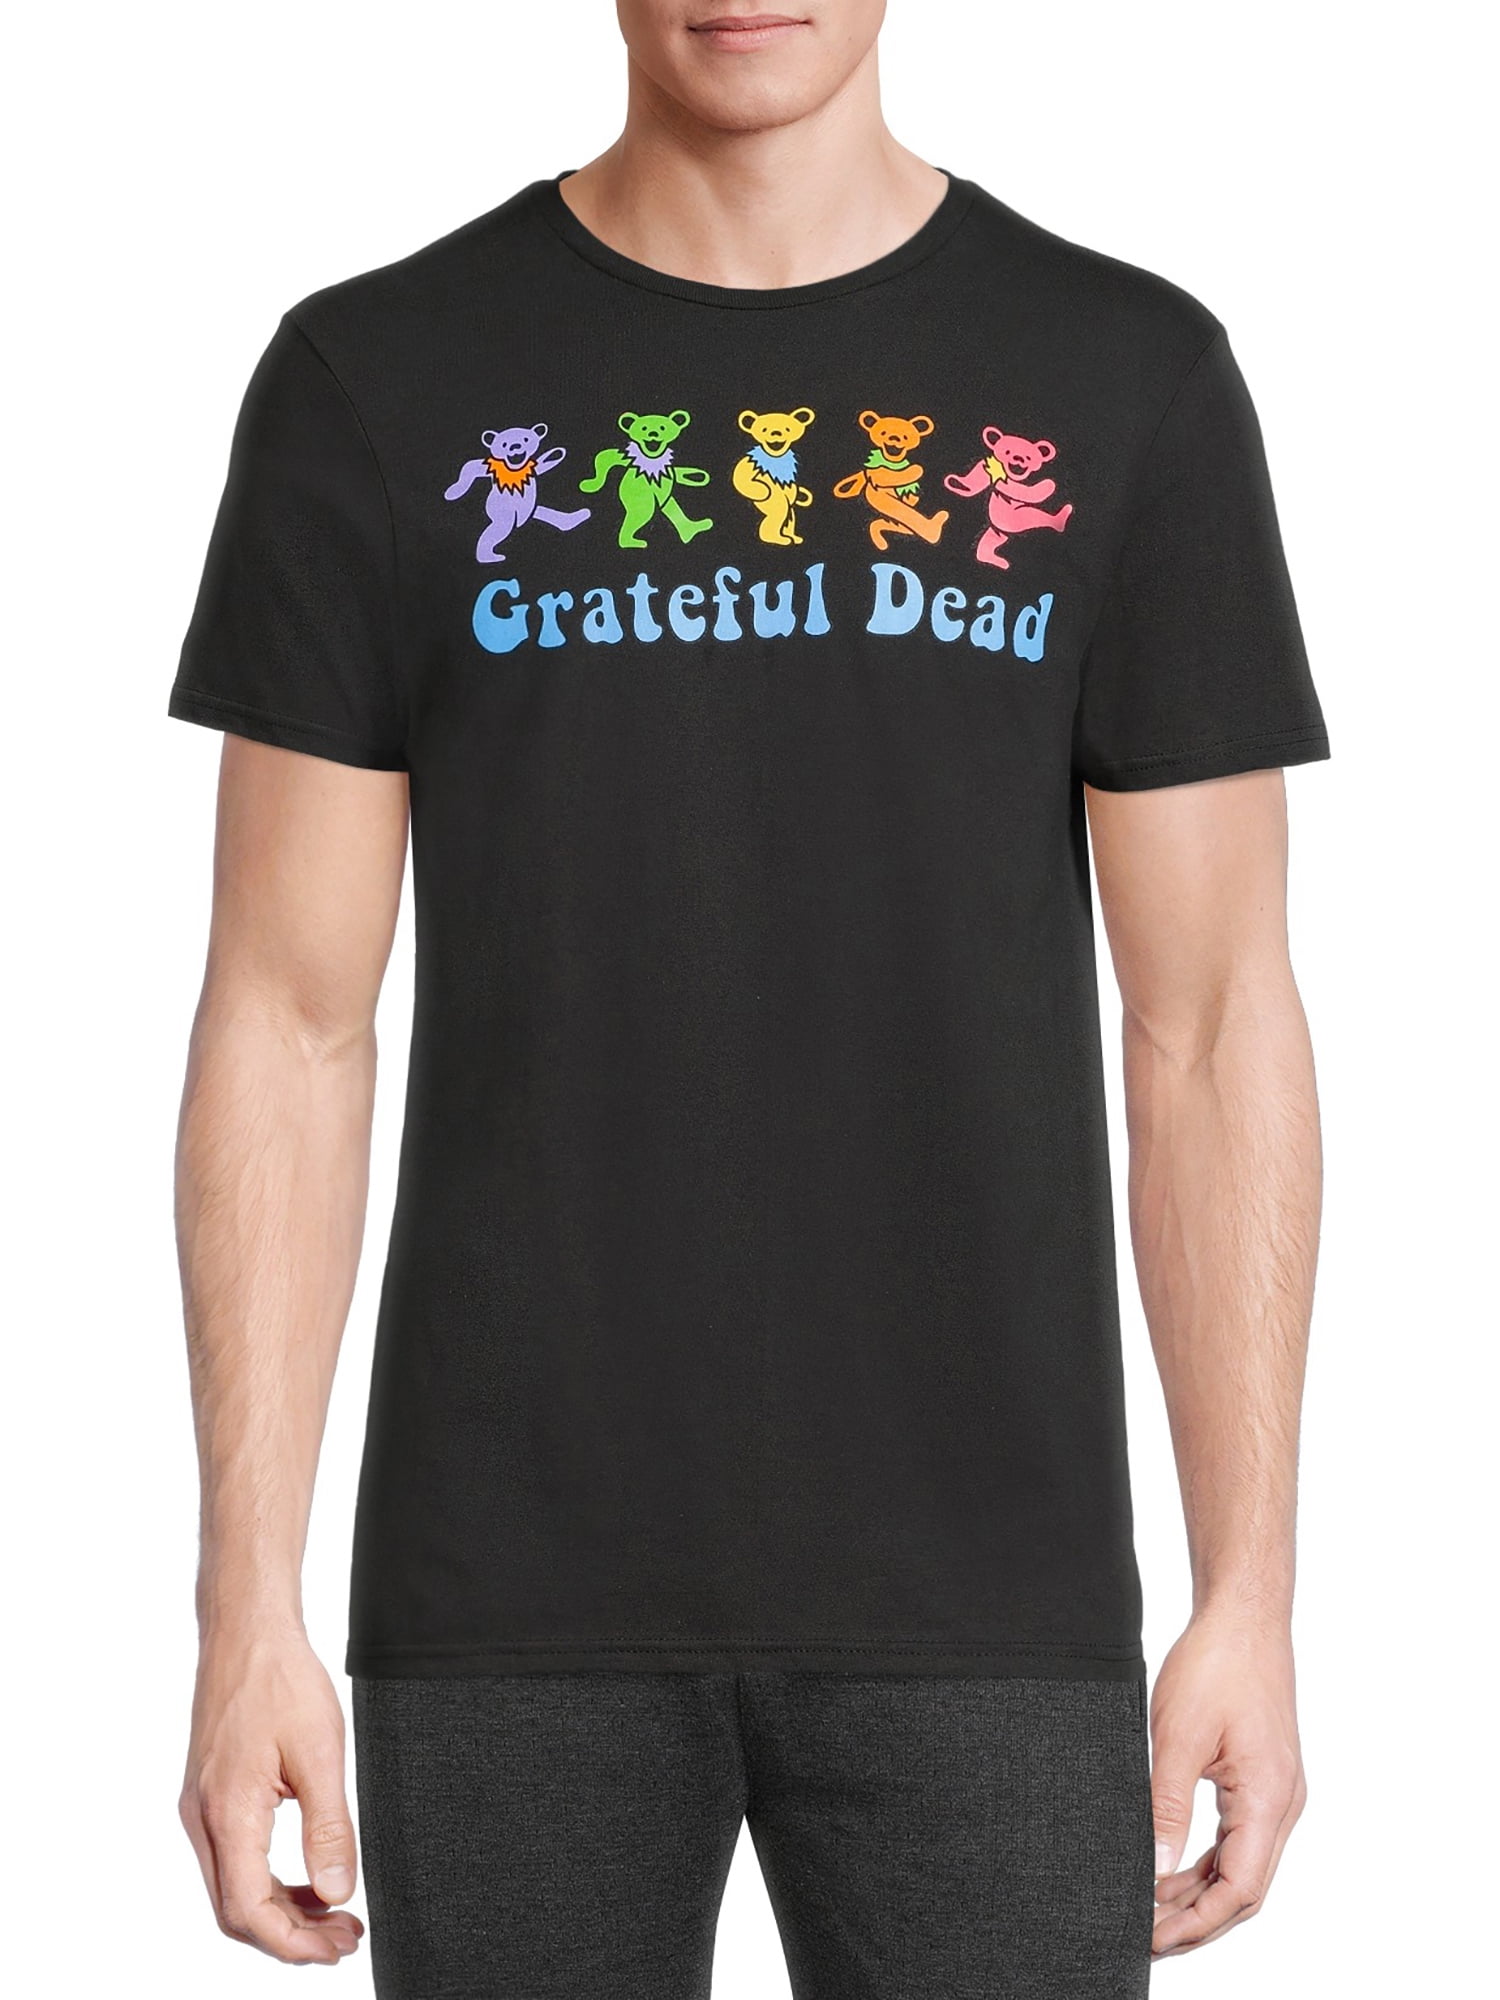 TM Band Logo Printed on a Unisex Cotton Tee Available in 8 Sizes and 3 Colors Grateful Dead